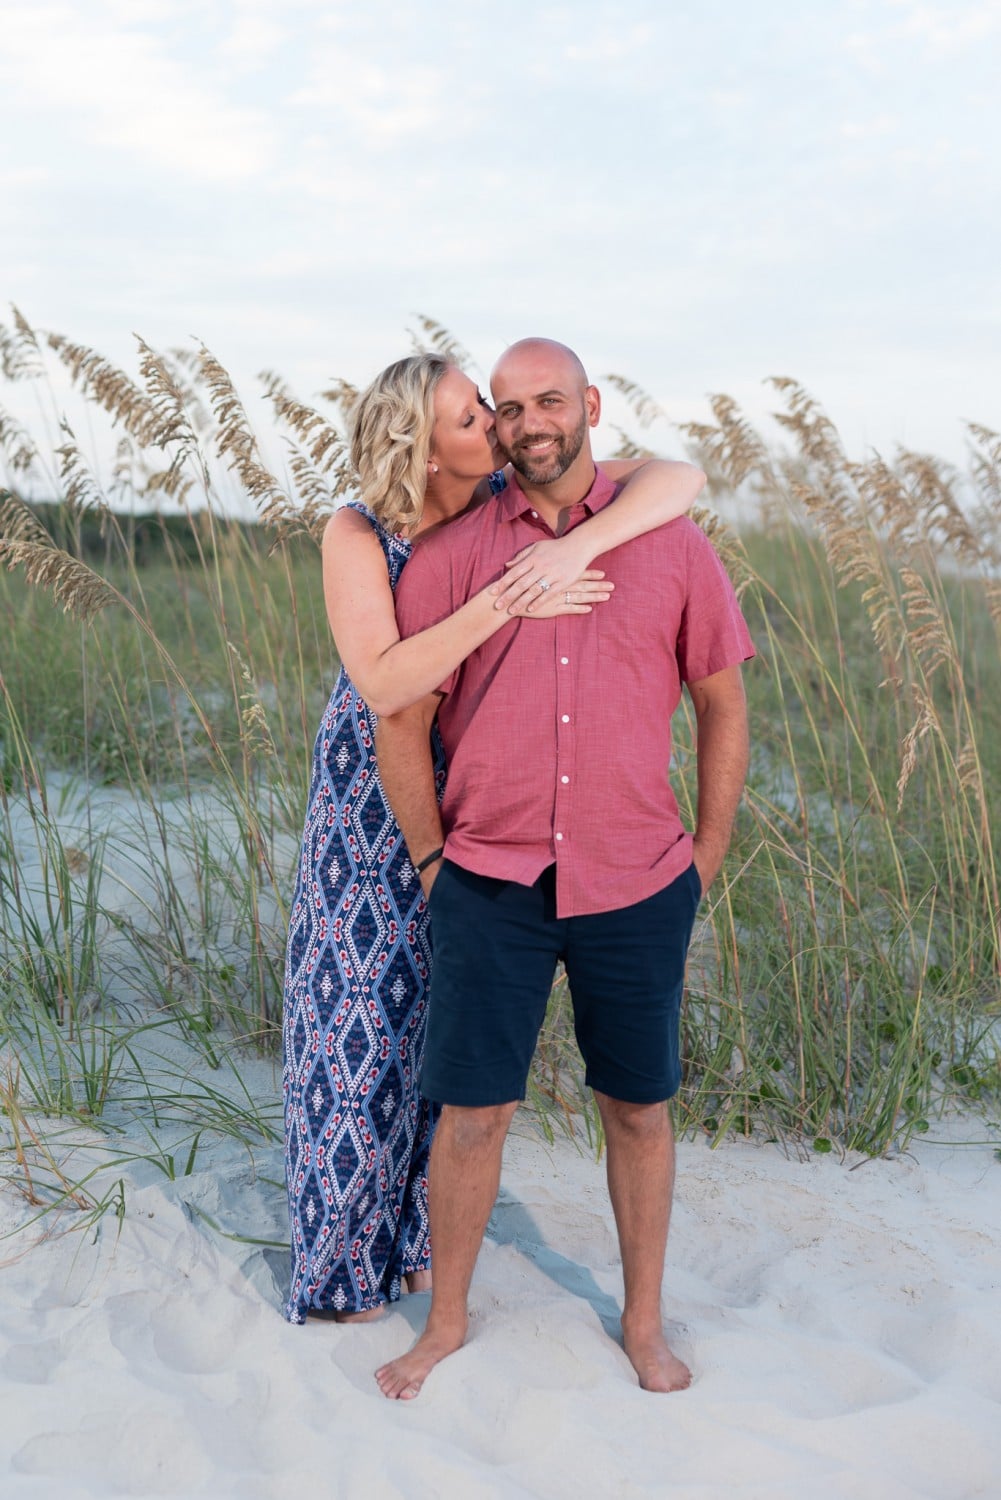 Kiss on the cheek in front of the sea oats - Huntington Beach State Park